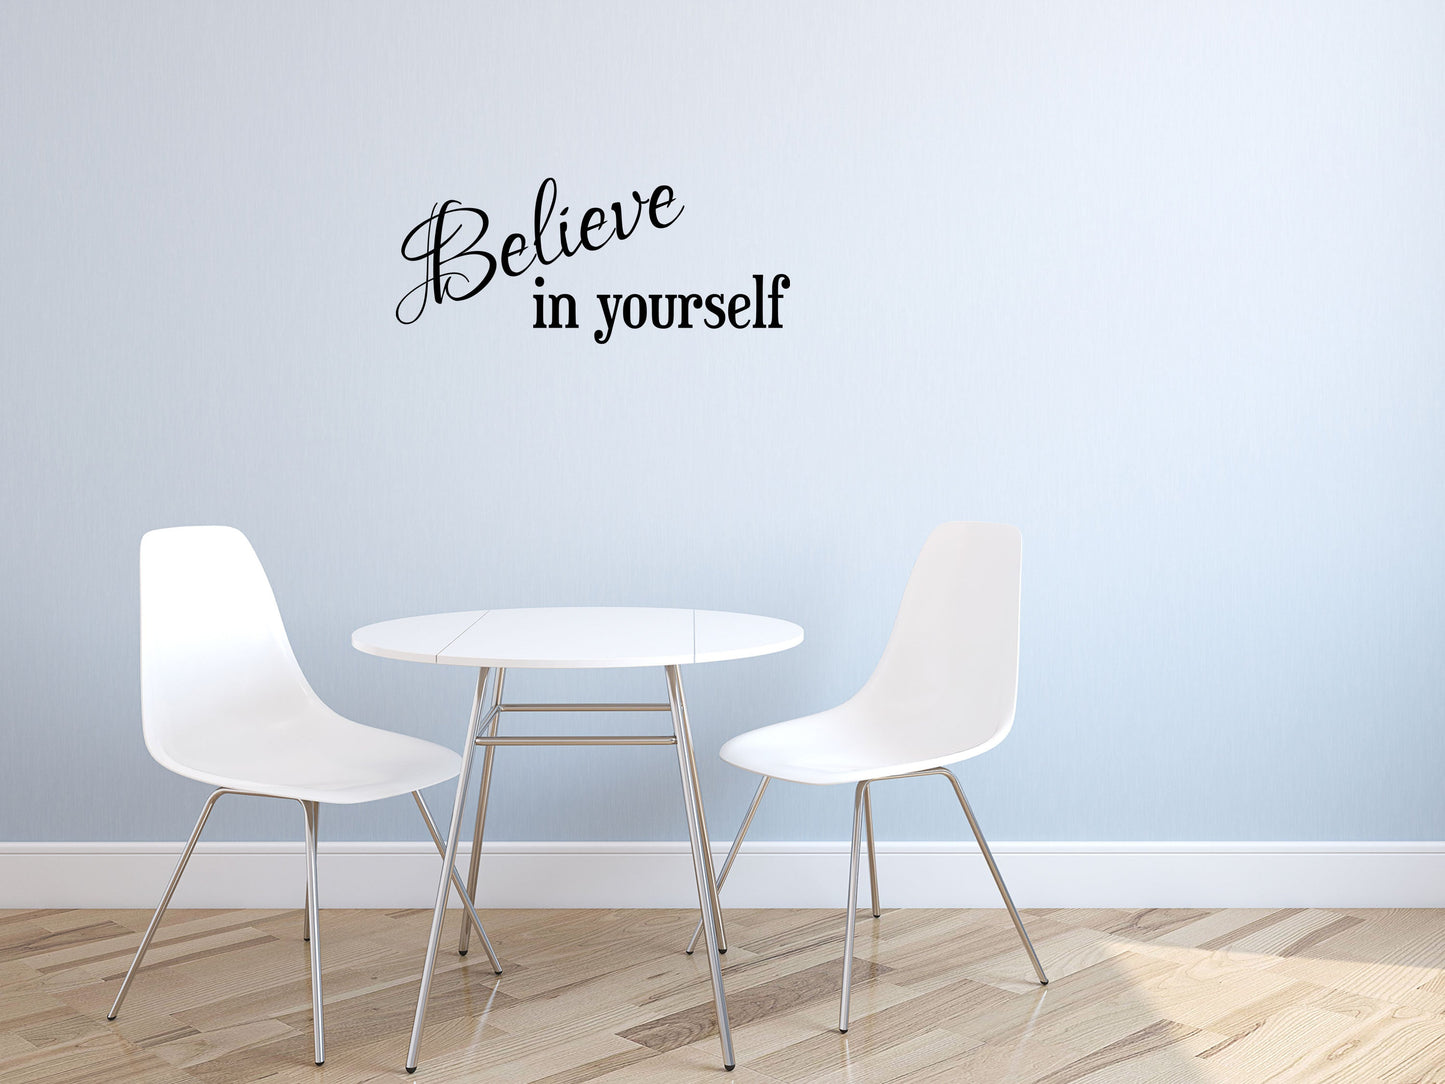 Motivation Wall Decal - Gym Wall Decal Vinyl Wall Decal Inspirational Wall Signs 